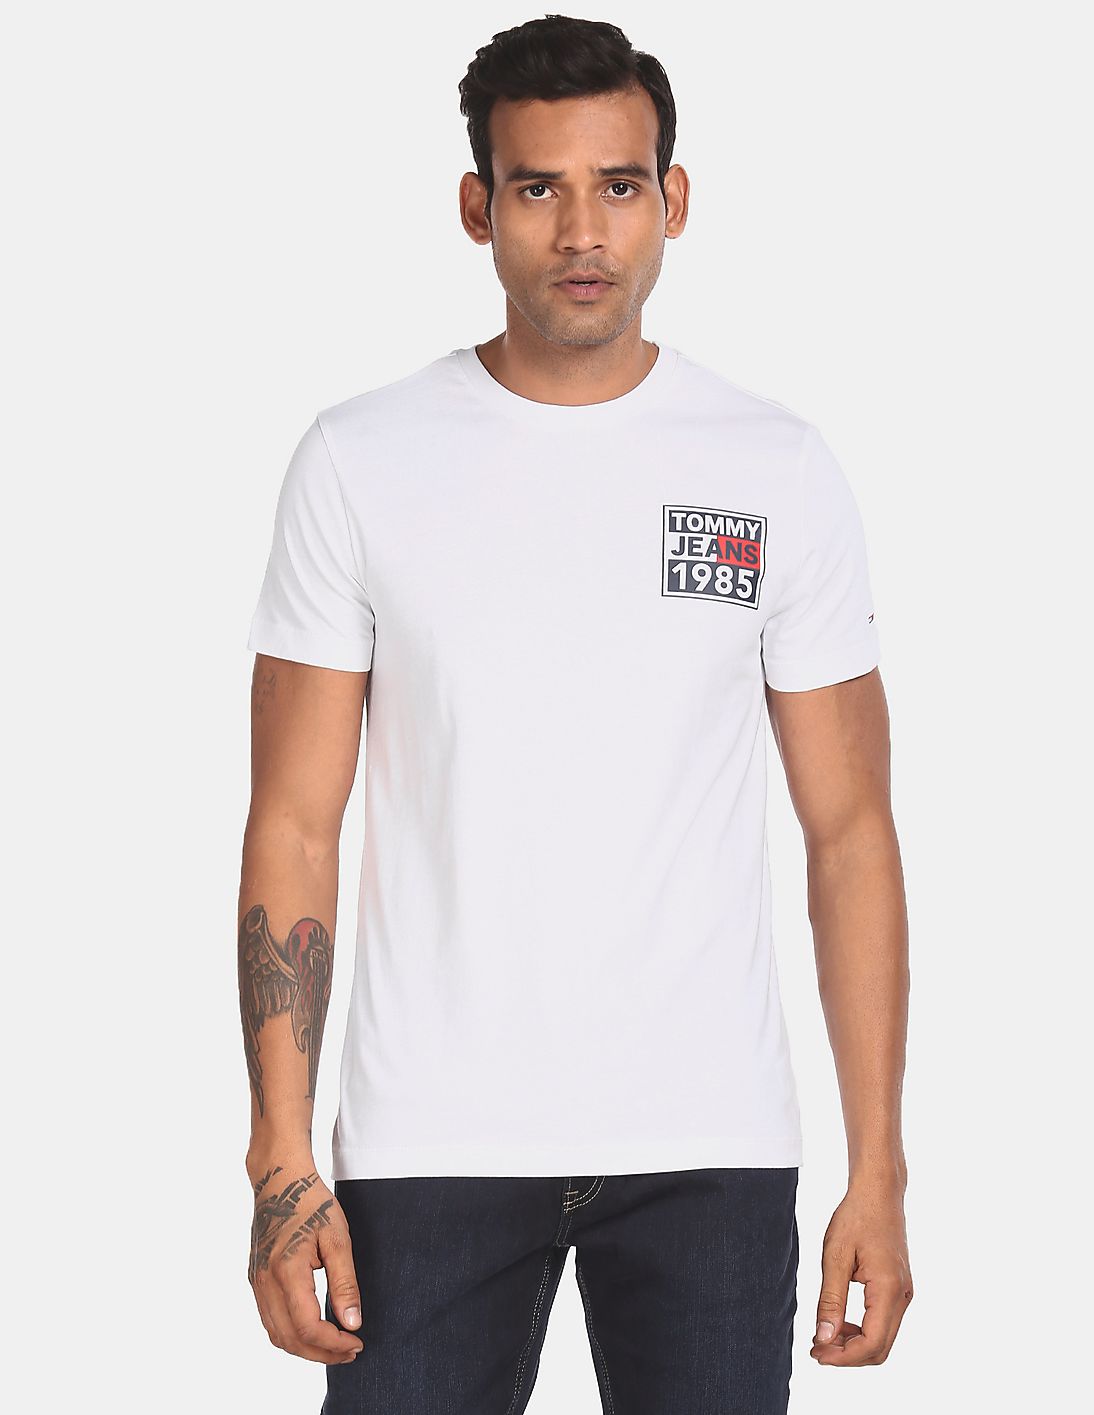 ÁO THUN TOMMY HILFIGER MEN WHITE COTTON FRONT AND BACK GRAPHIC PRINT T-SHIRT 2